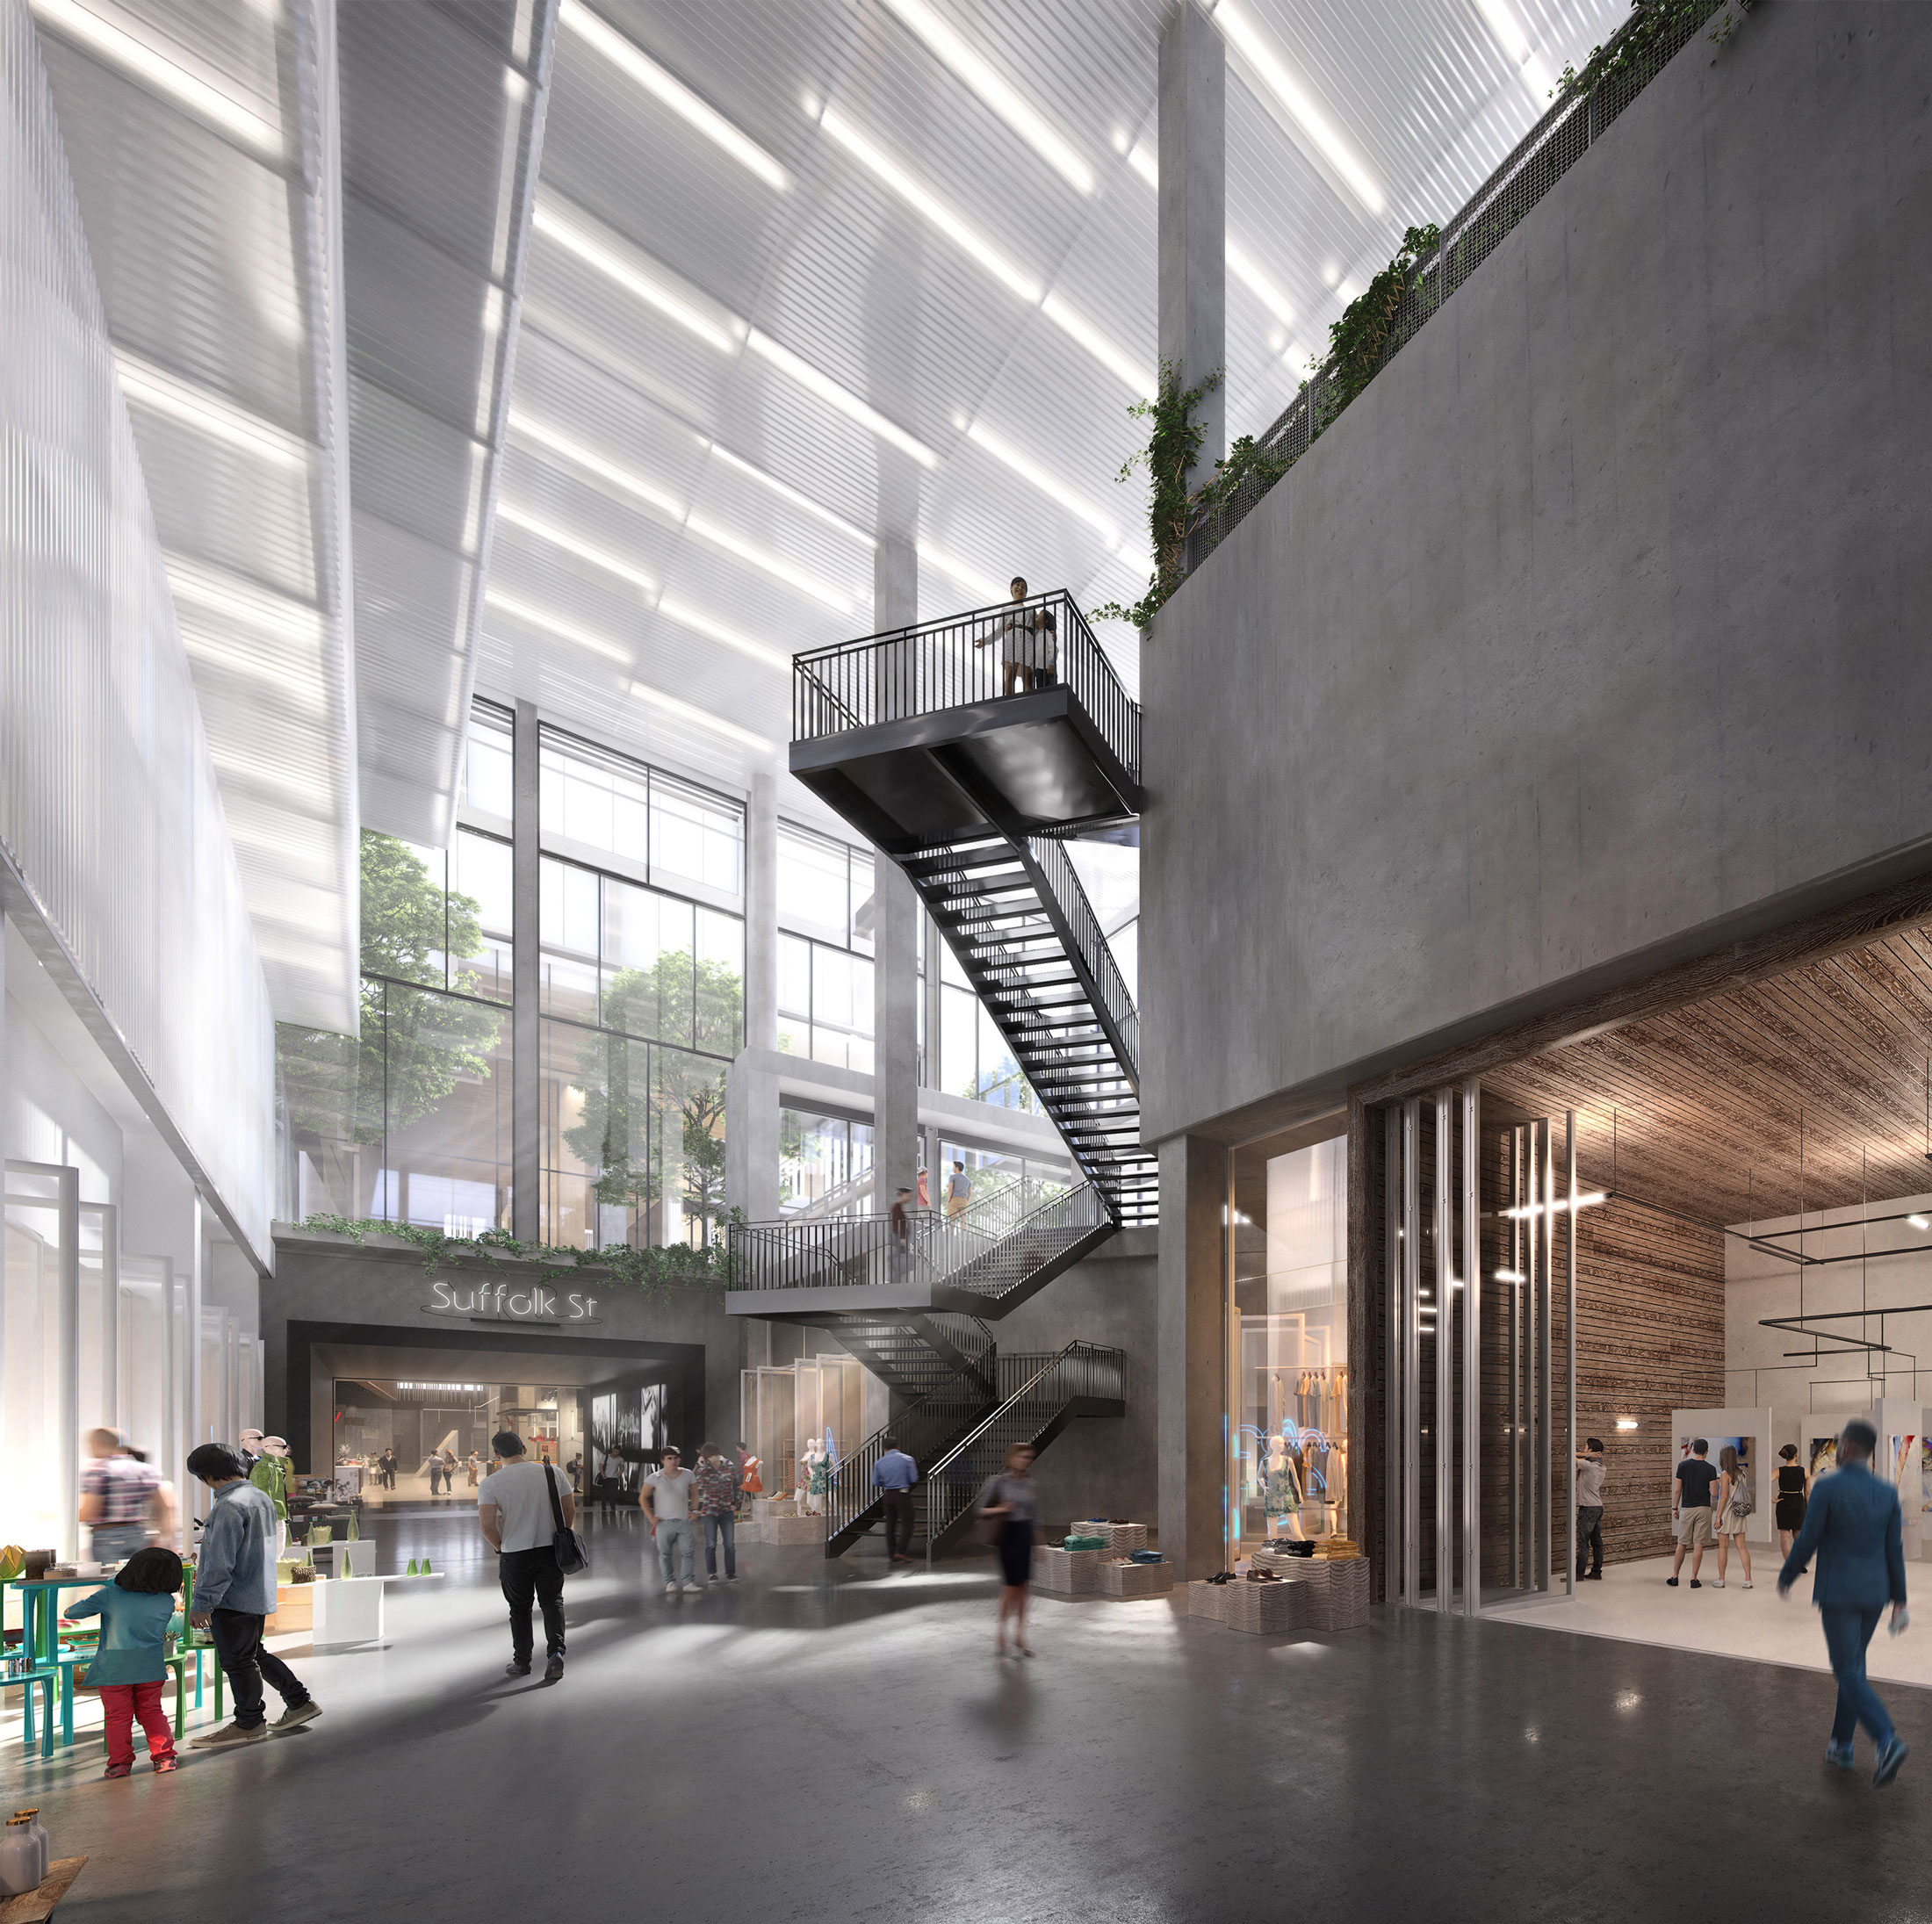 Architectural Rendering of the interior of the The Market Line project located on the Lower East Side, New York City